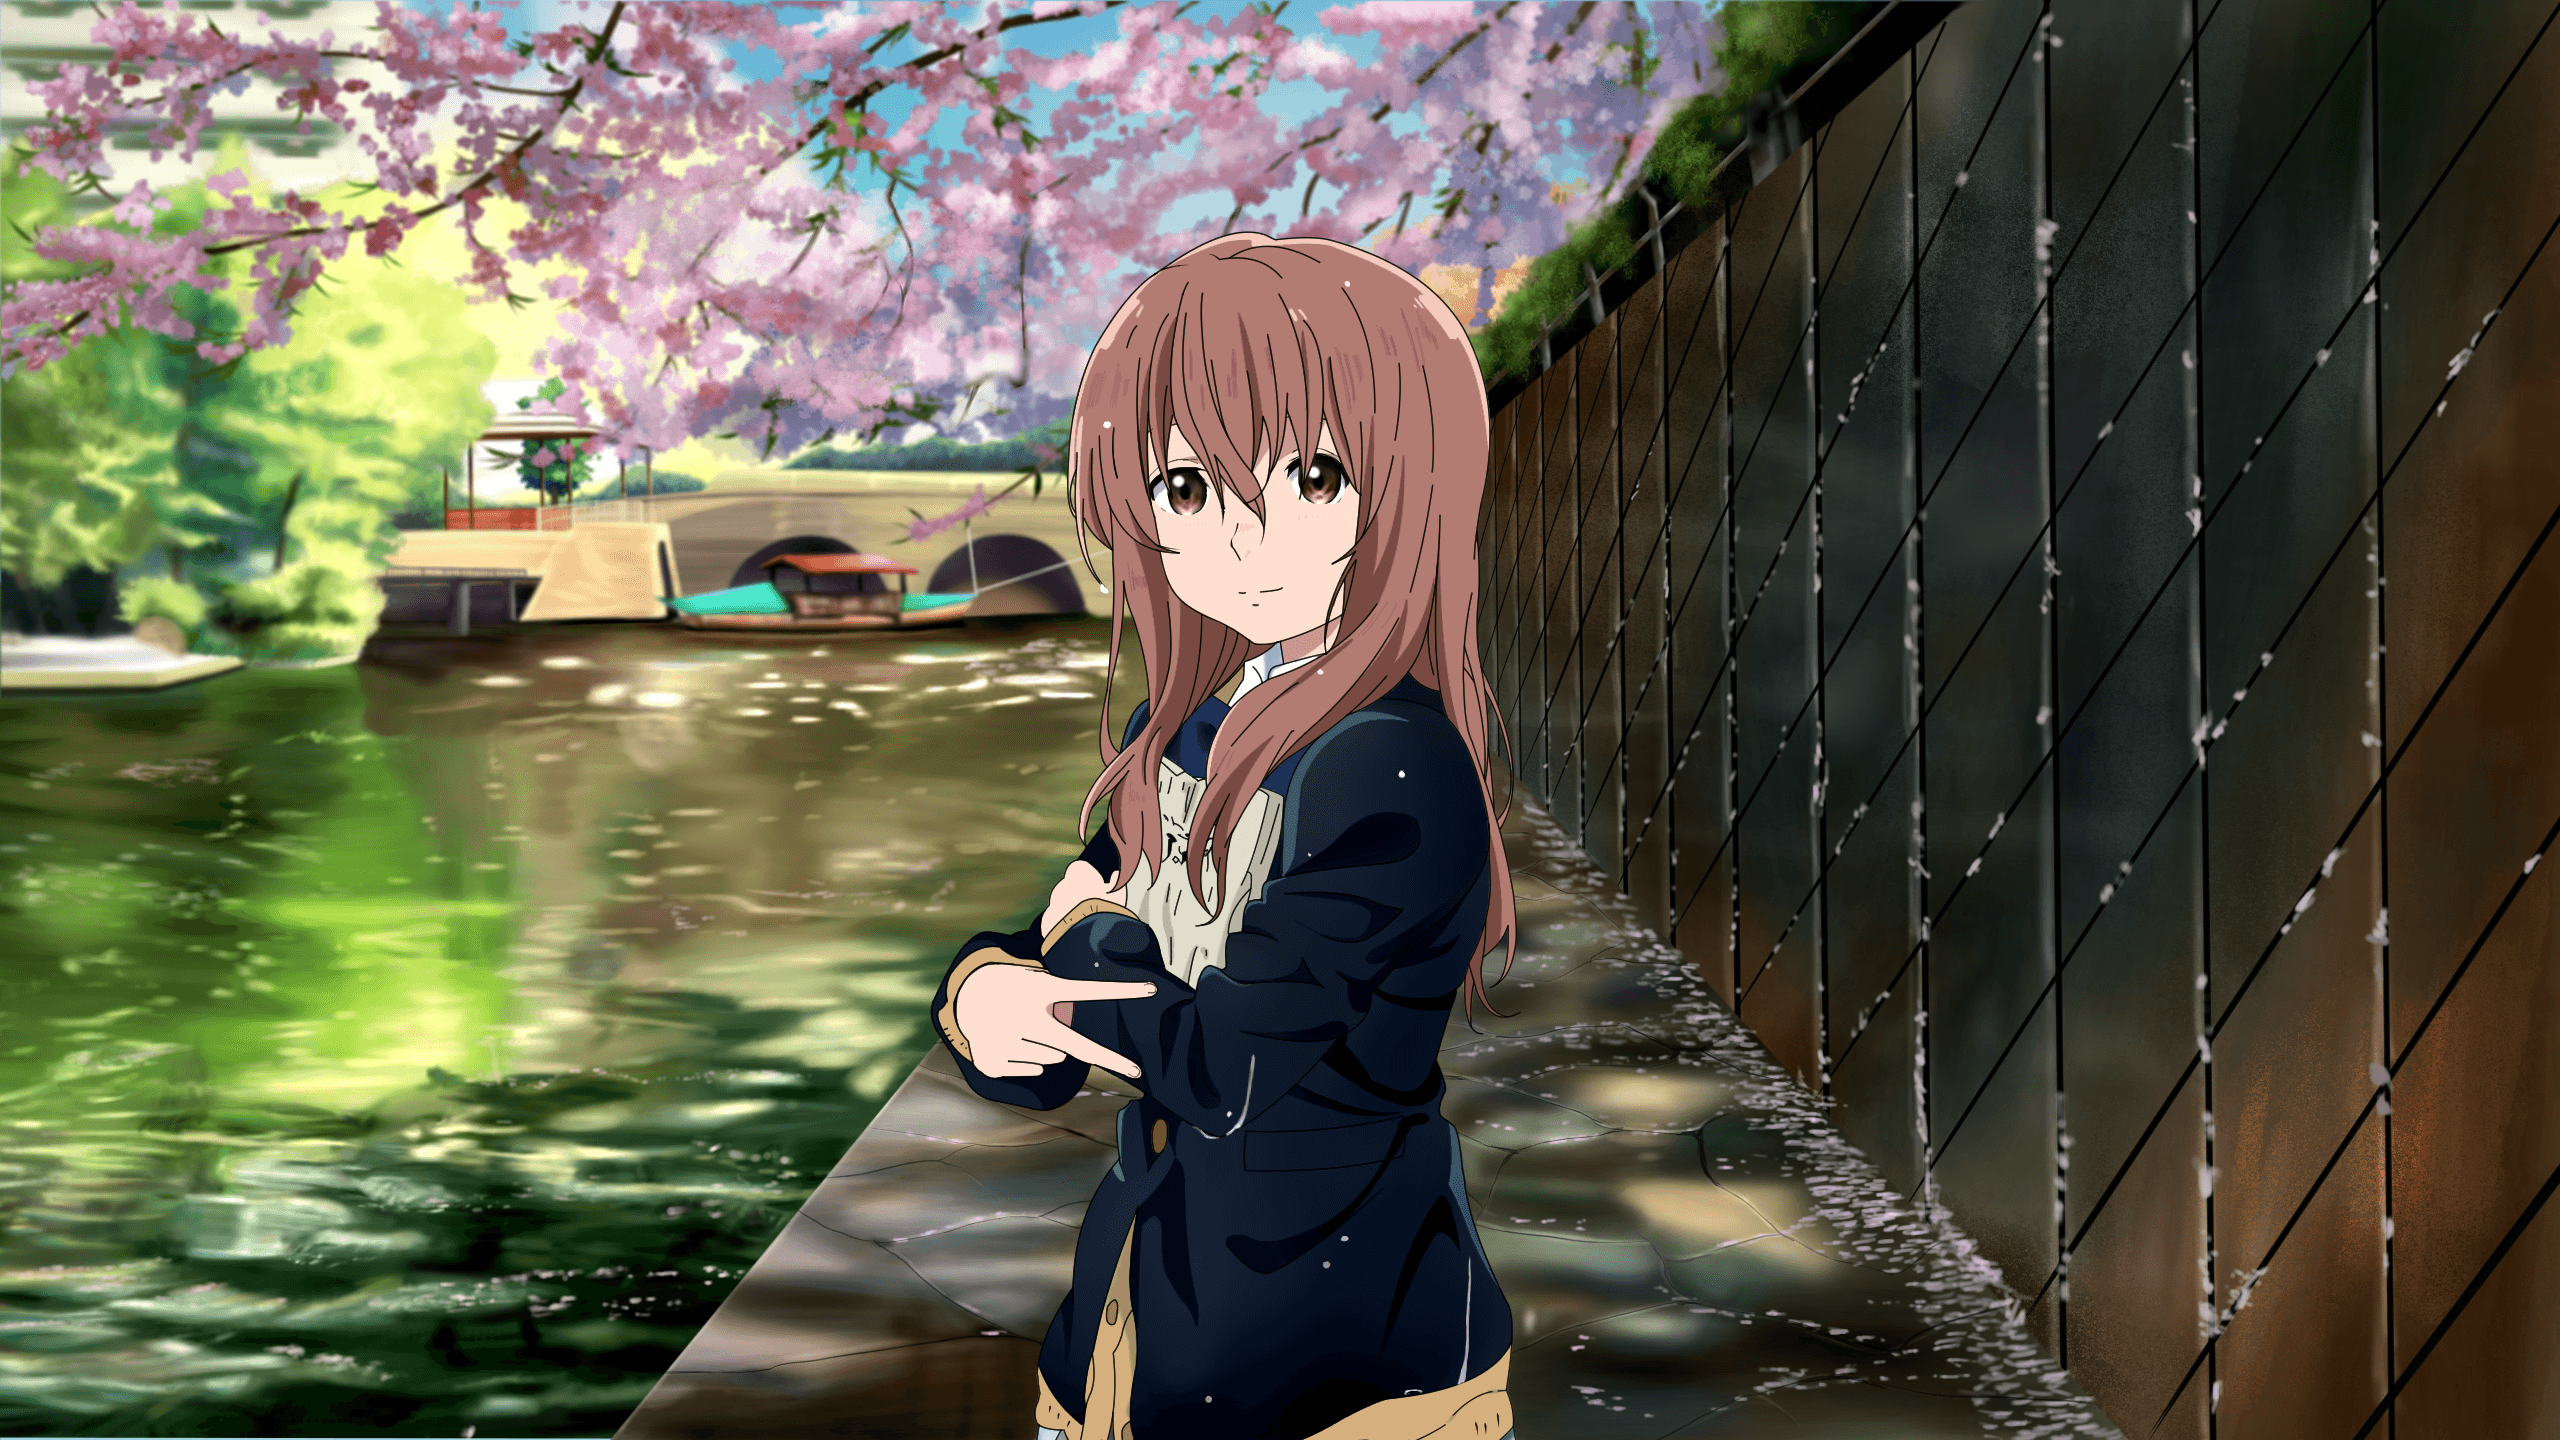 Koe no Katachi image A Silent Voice HD wallpapers and backgrounds.